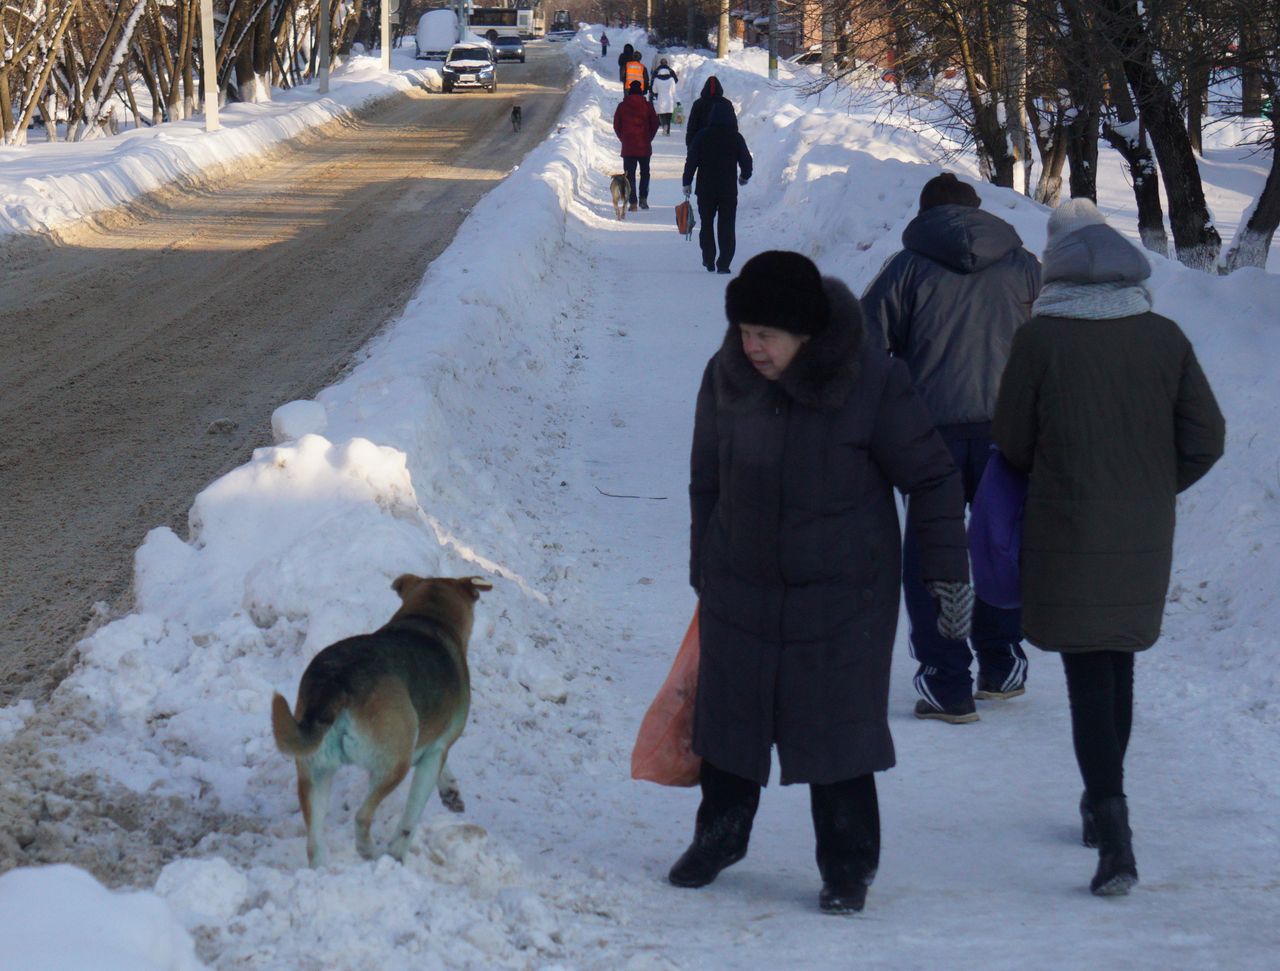 'Freezing in Podolsk: Citizens endure winter without heat as authorities choose police over aid'